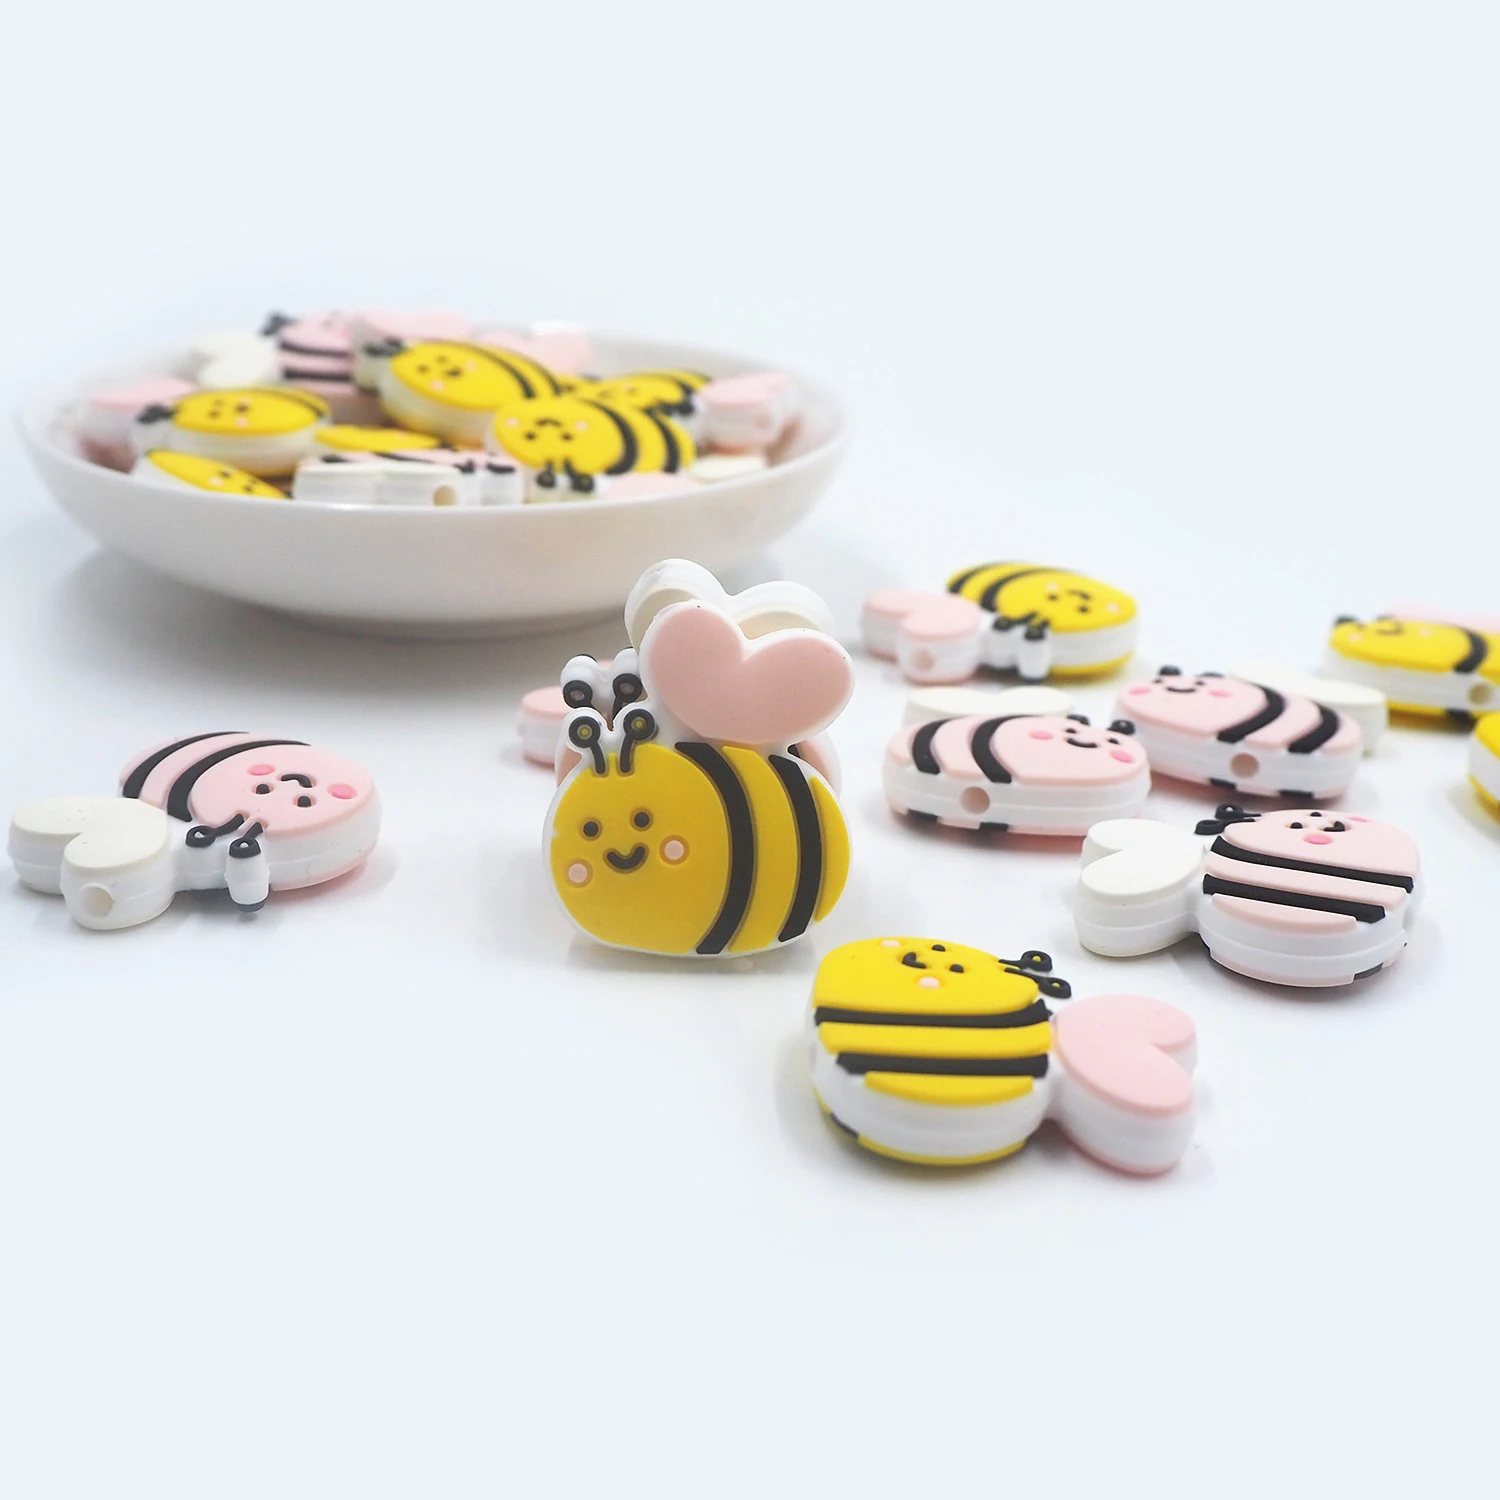 

Chenkai 50PCS Bee Focal Beads Silicone Charms For Pen Making Character Beads For Beadable Pen DIY Baby Pacifier Dummy Chains